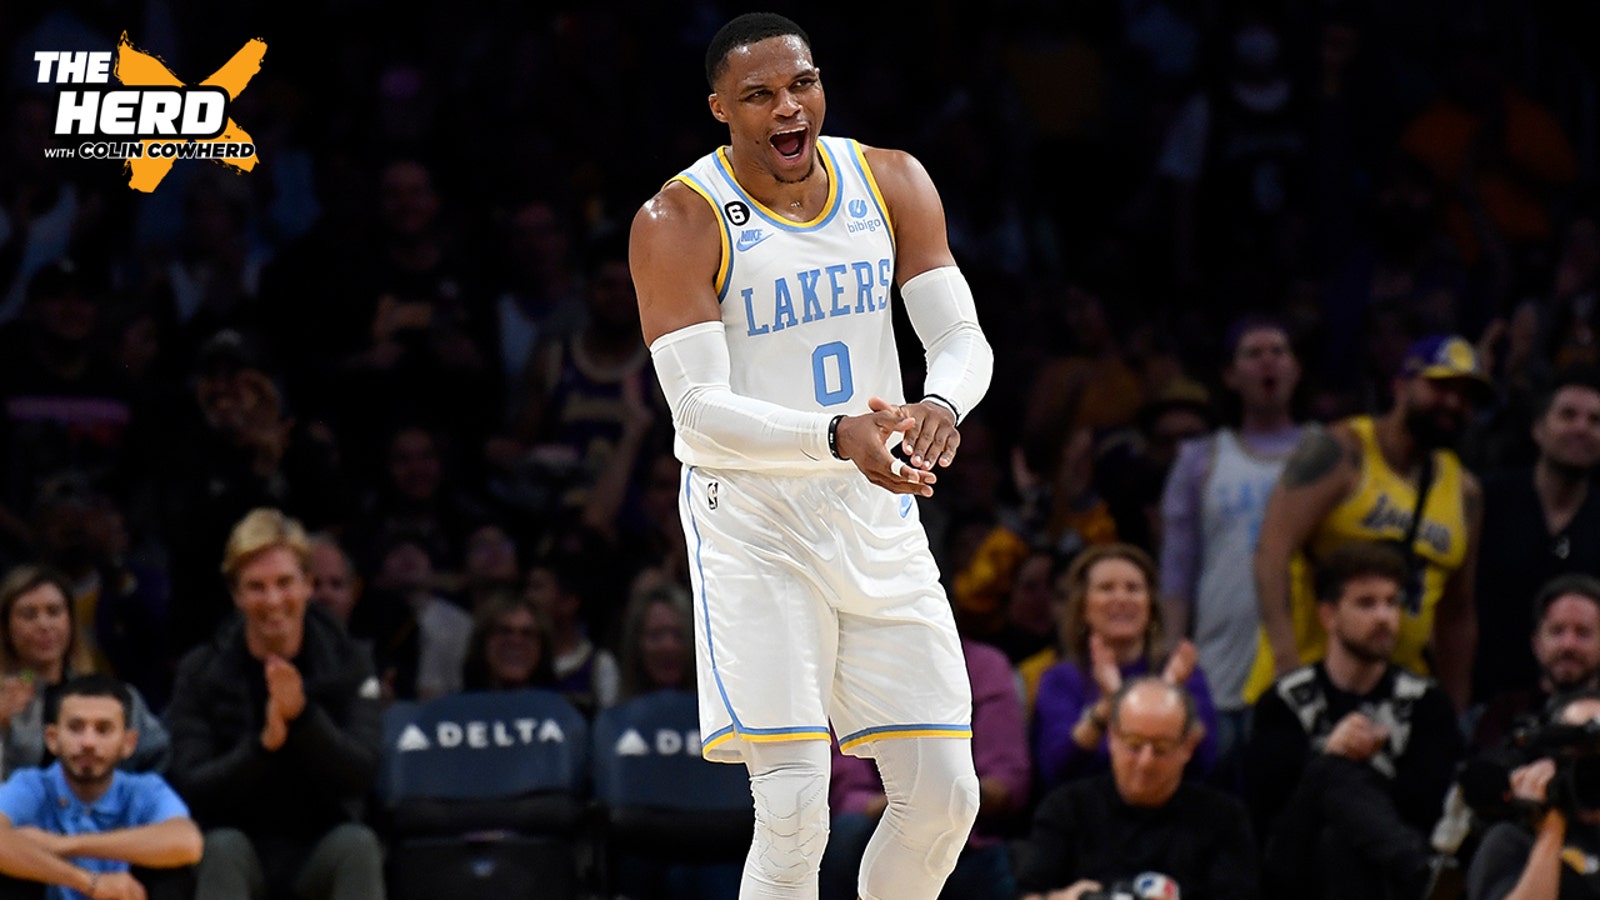 Lakers win second straight win with Russell Westbrook off the bench